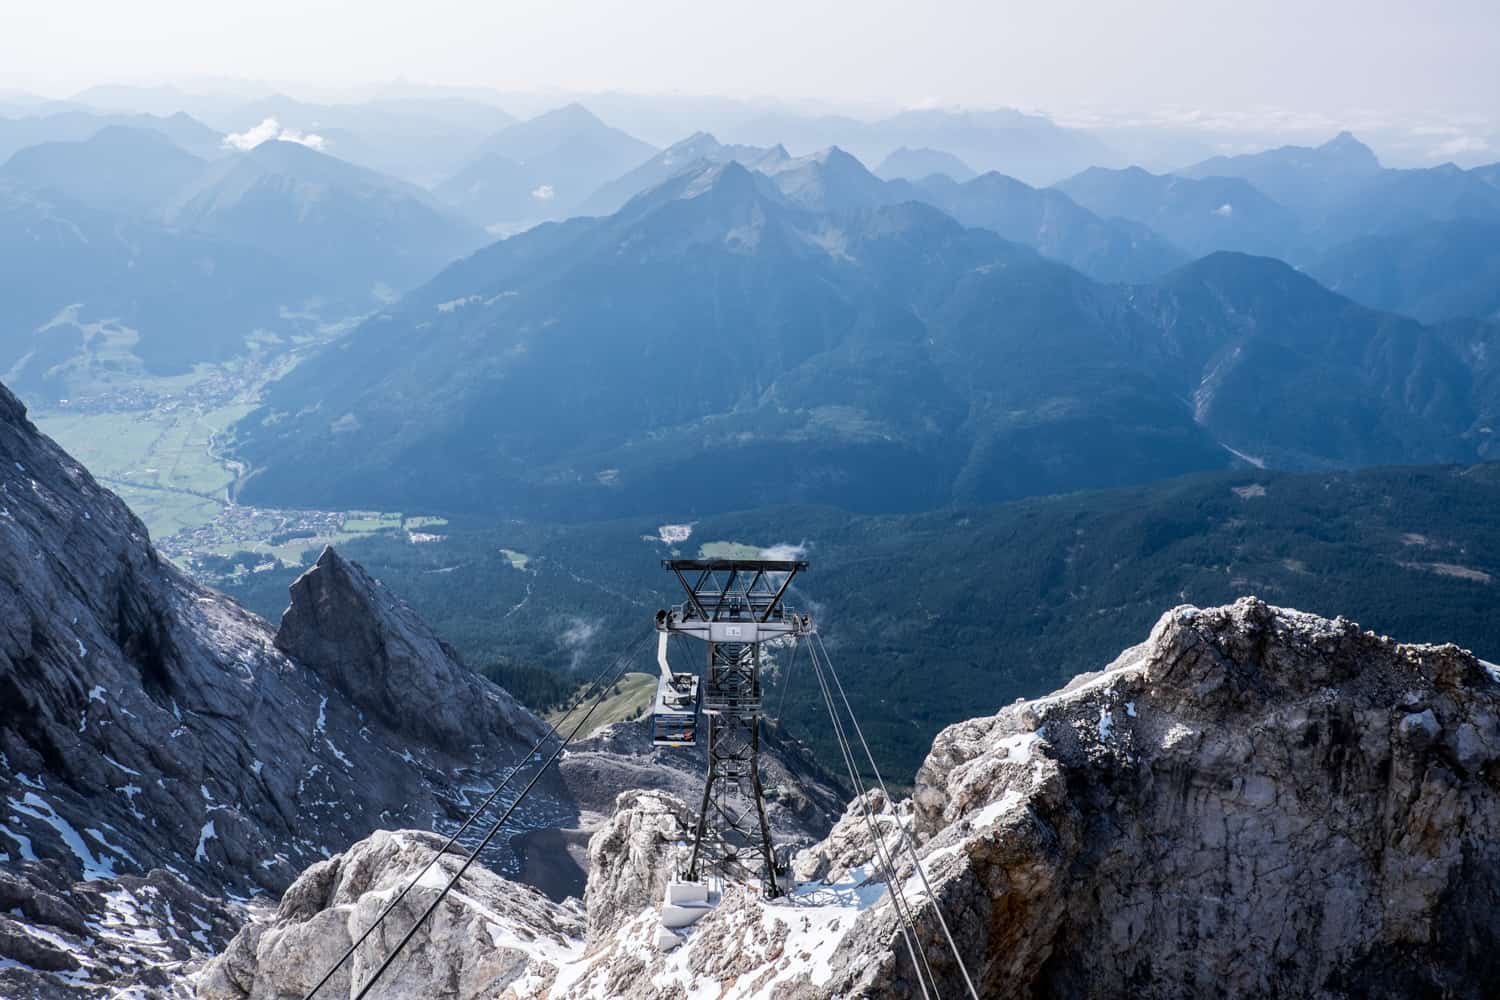 Views from the top of Germany on Zugspitze mountain from the cable car on the Austria side